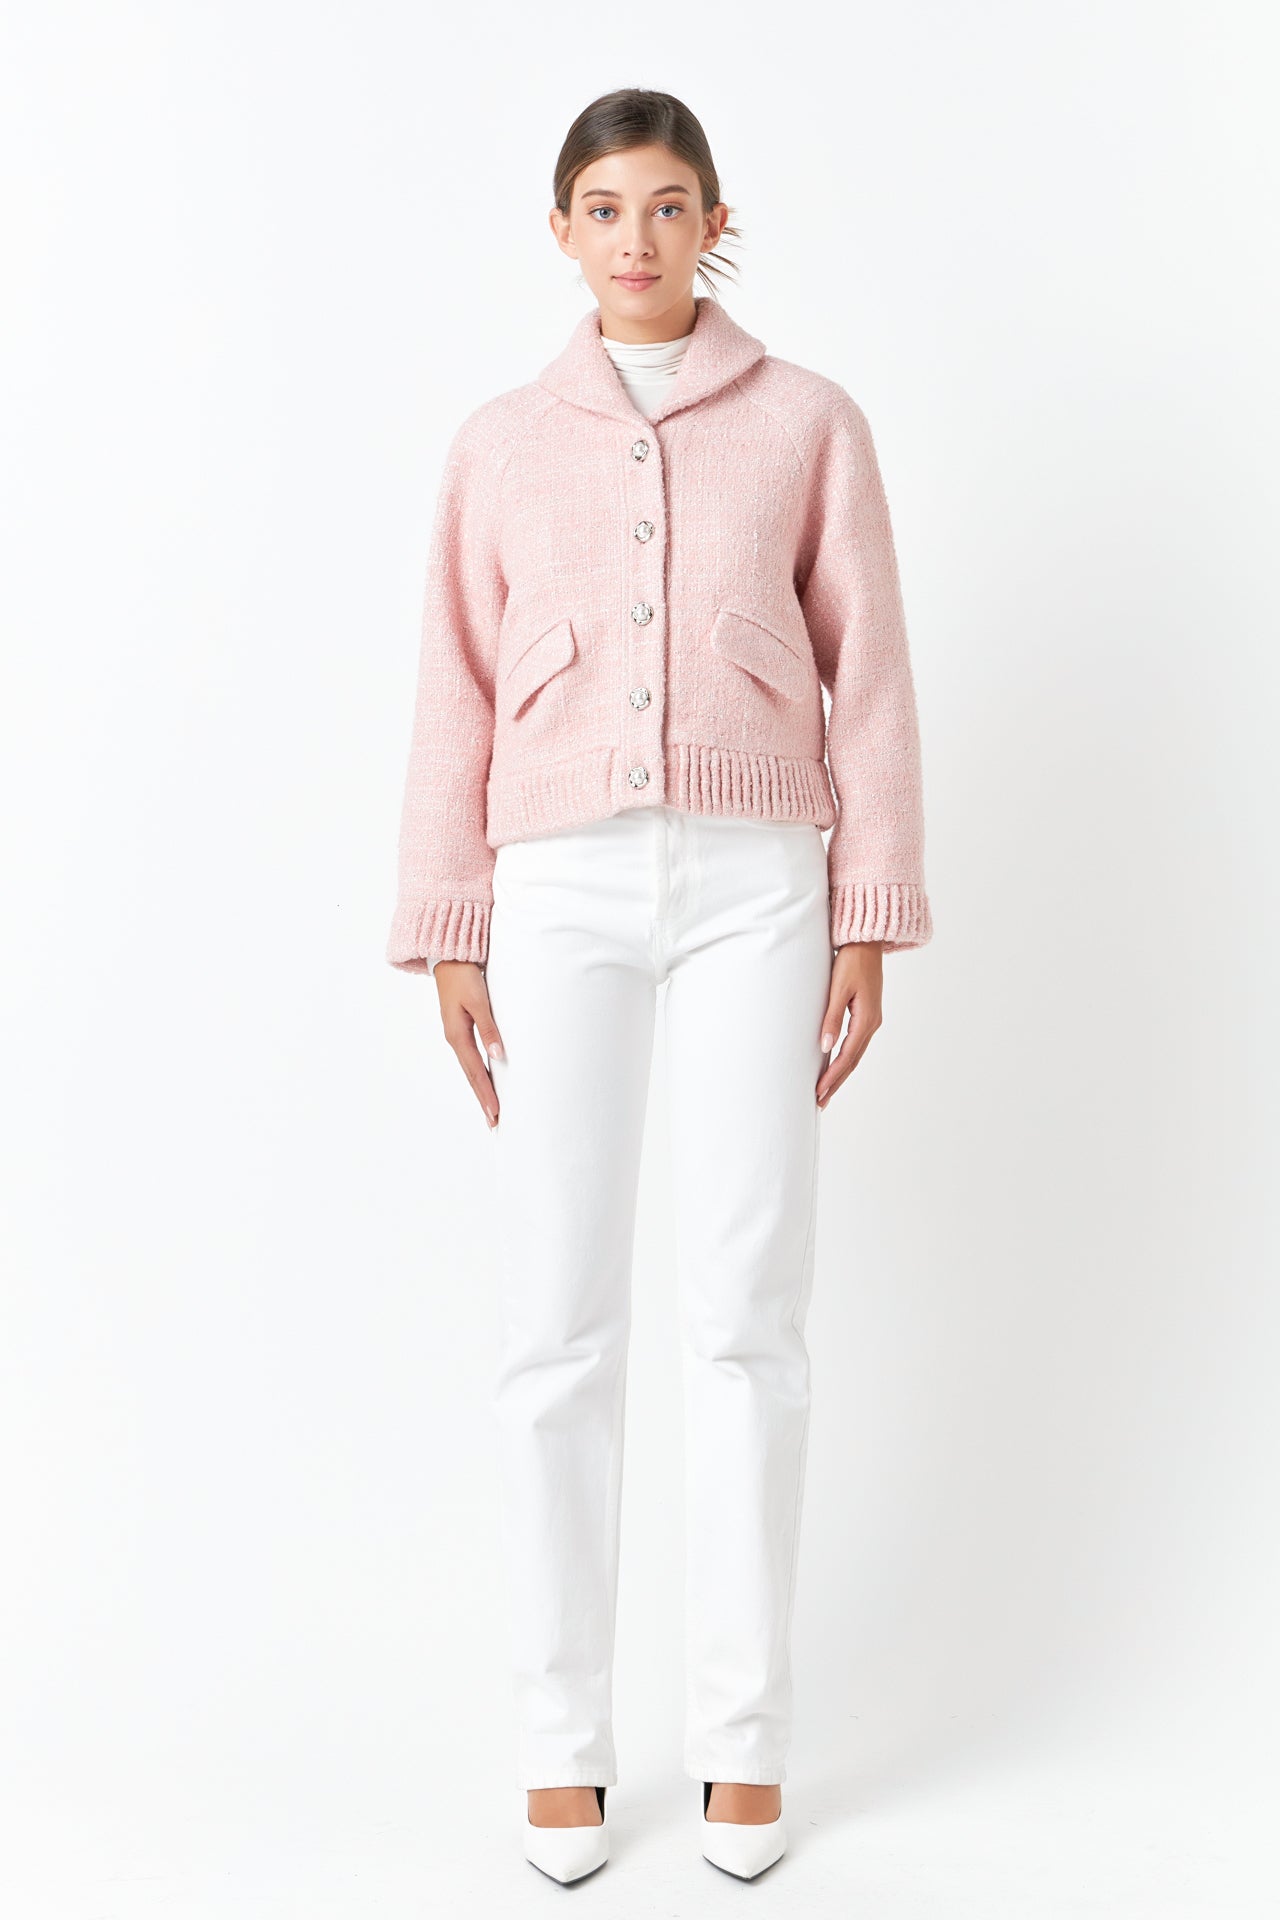 ENDLESS ROSE - Tweed Collared Jacket - JACKETS available at Objectrare